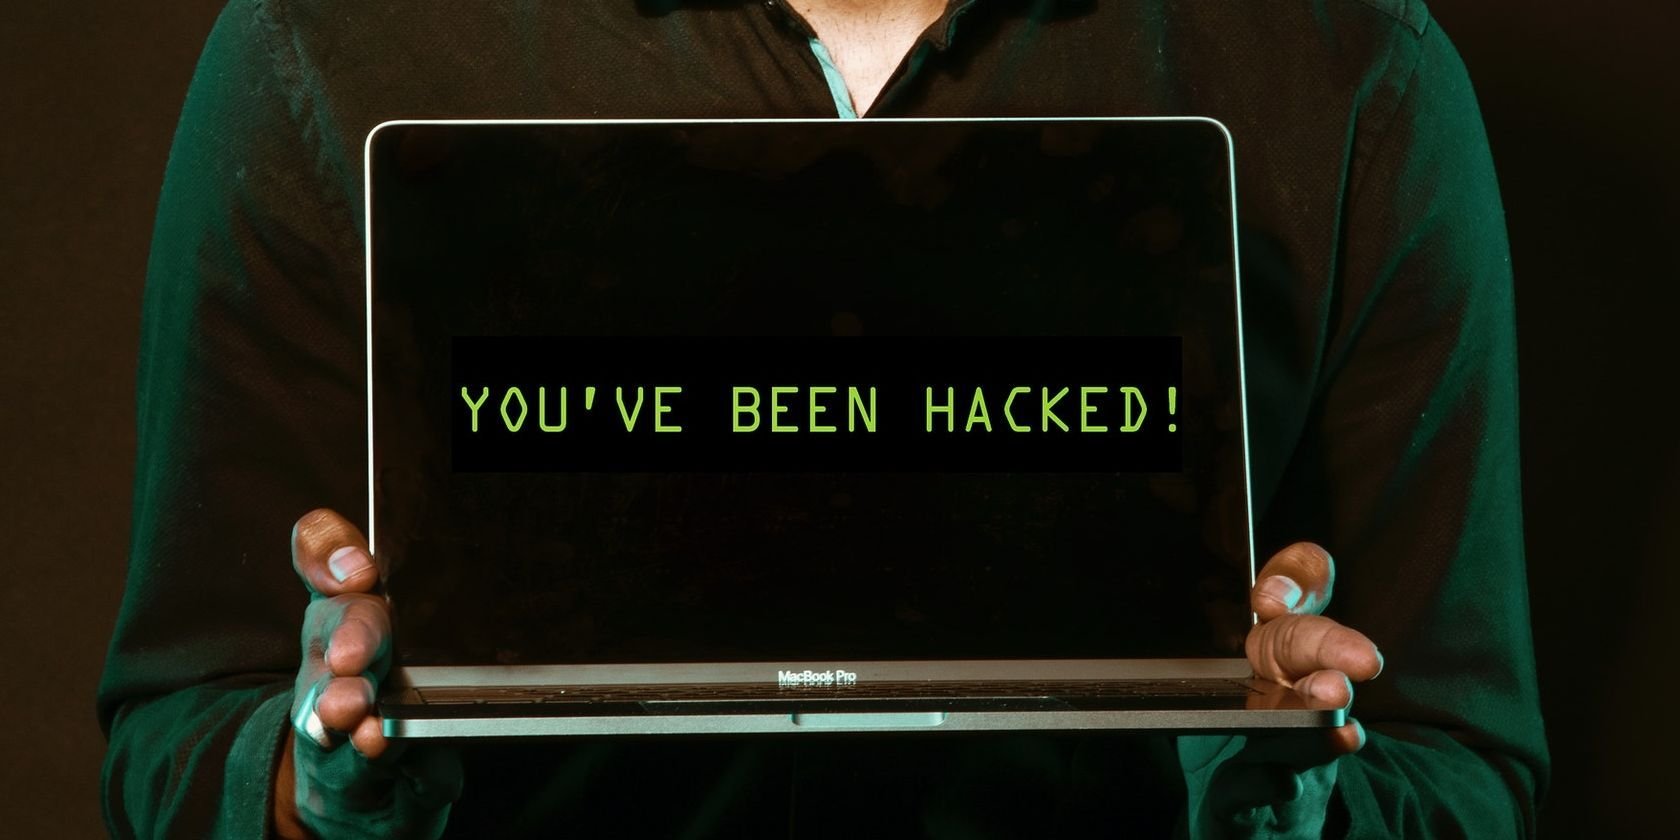 9 Signs Your Social Media Accounts Have Been Hacked